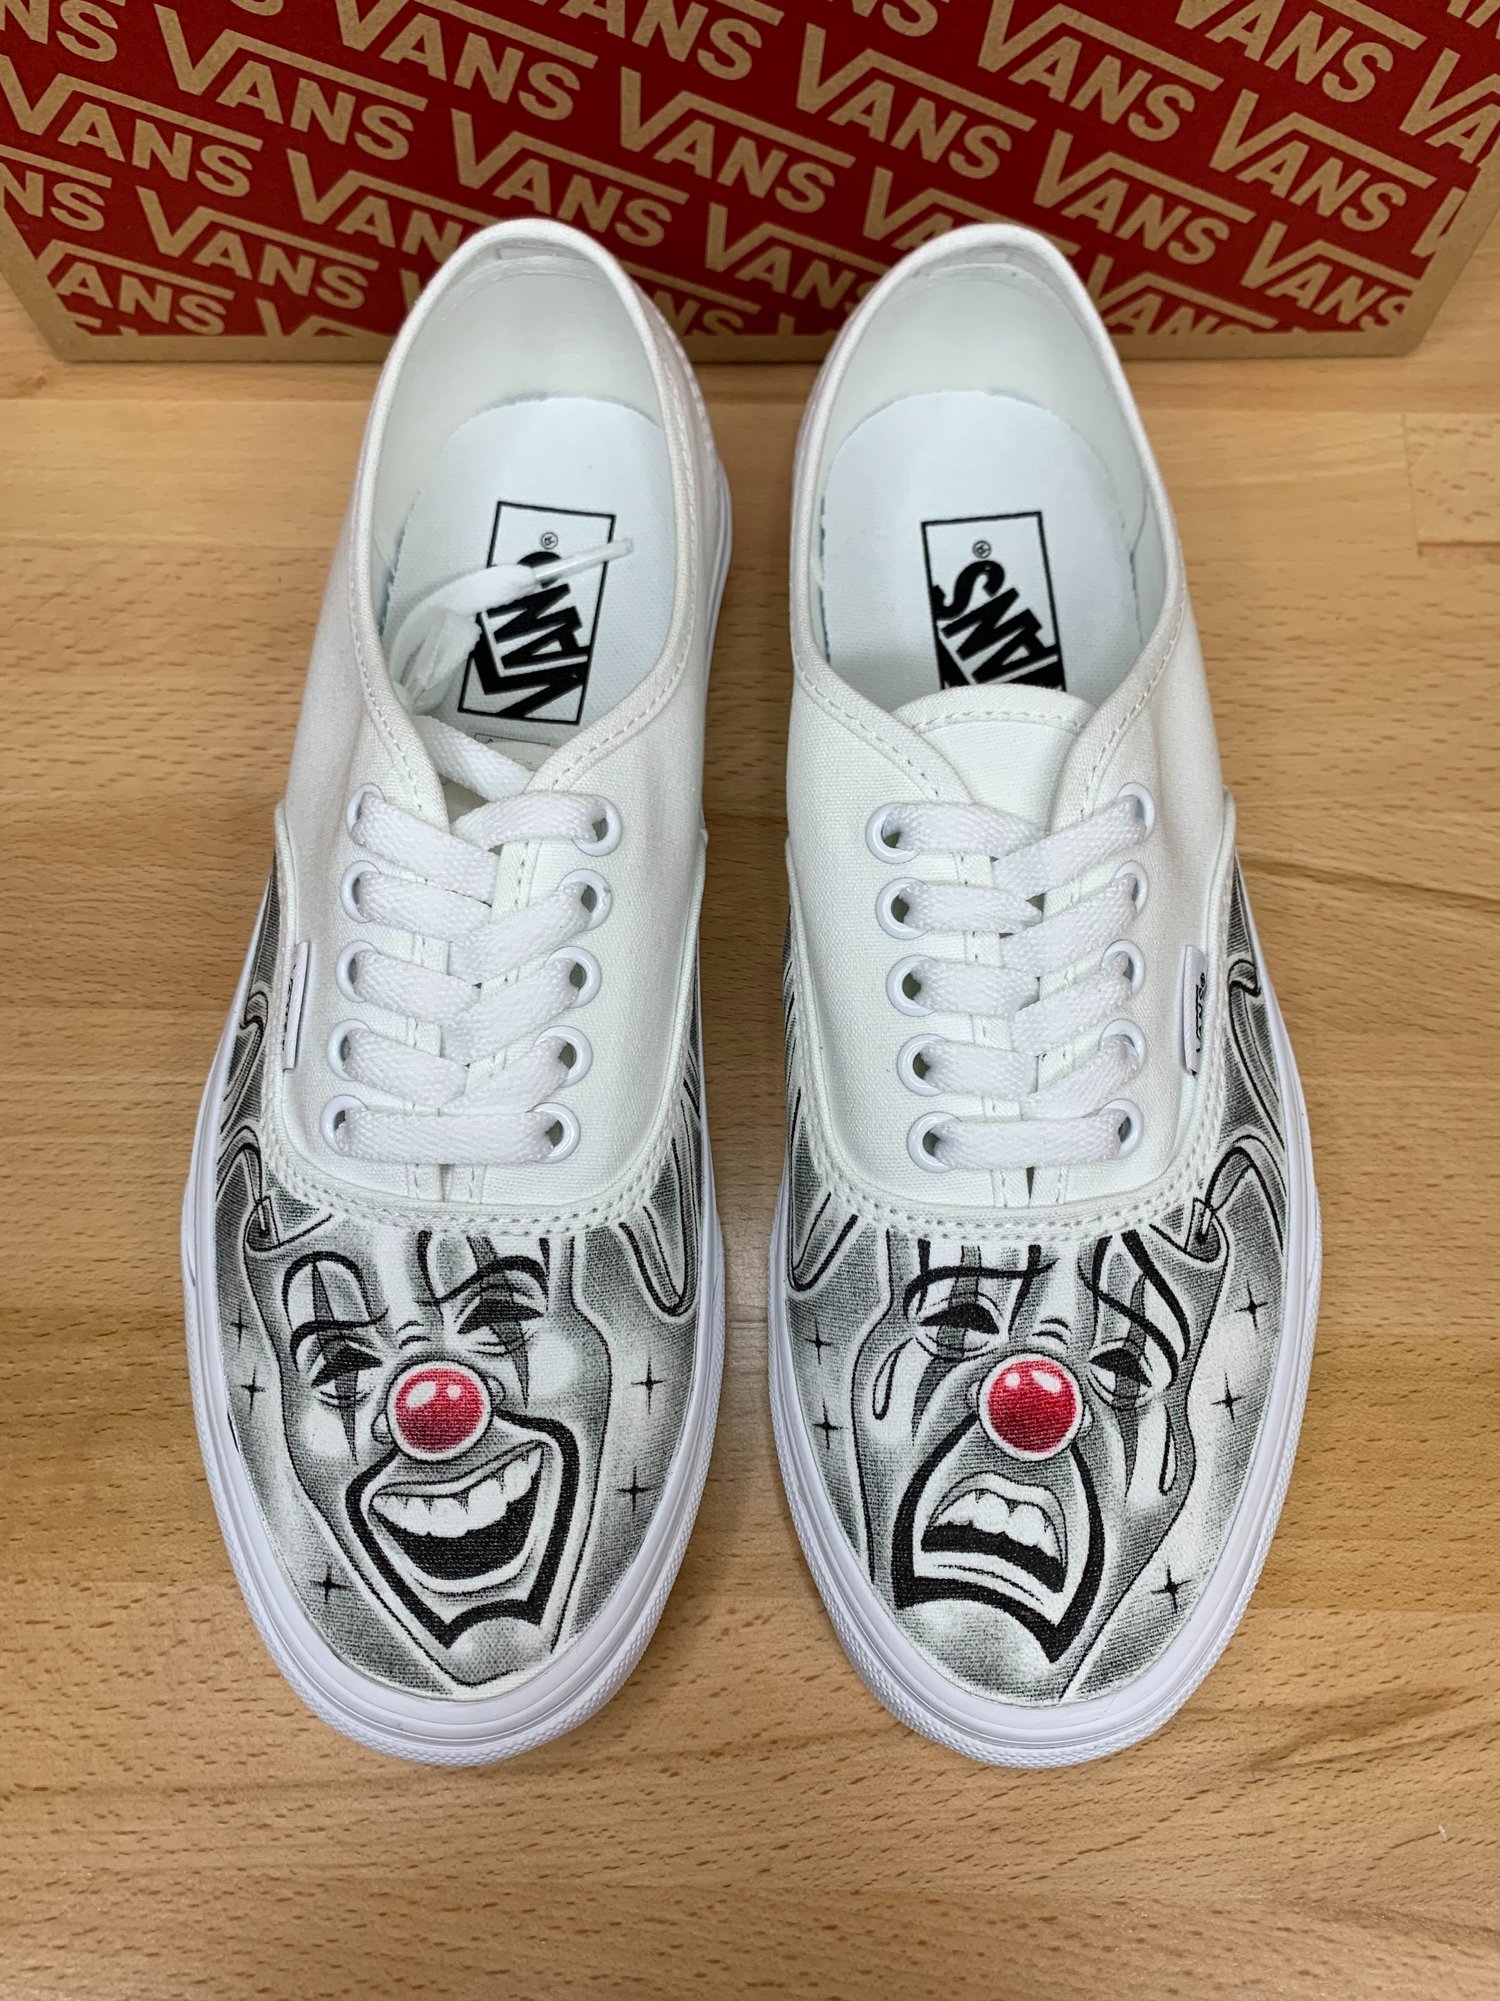 Custom Vans Shoes - Smile Now, Cry Later Design (Hand Drawn) ART CO.